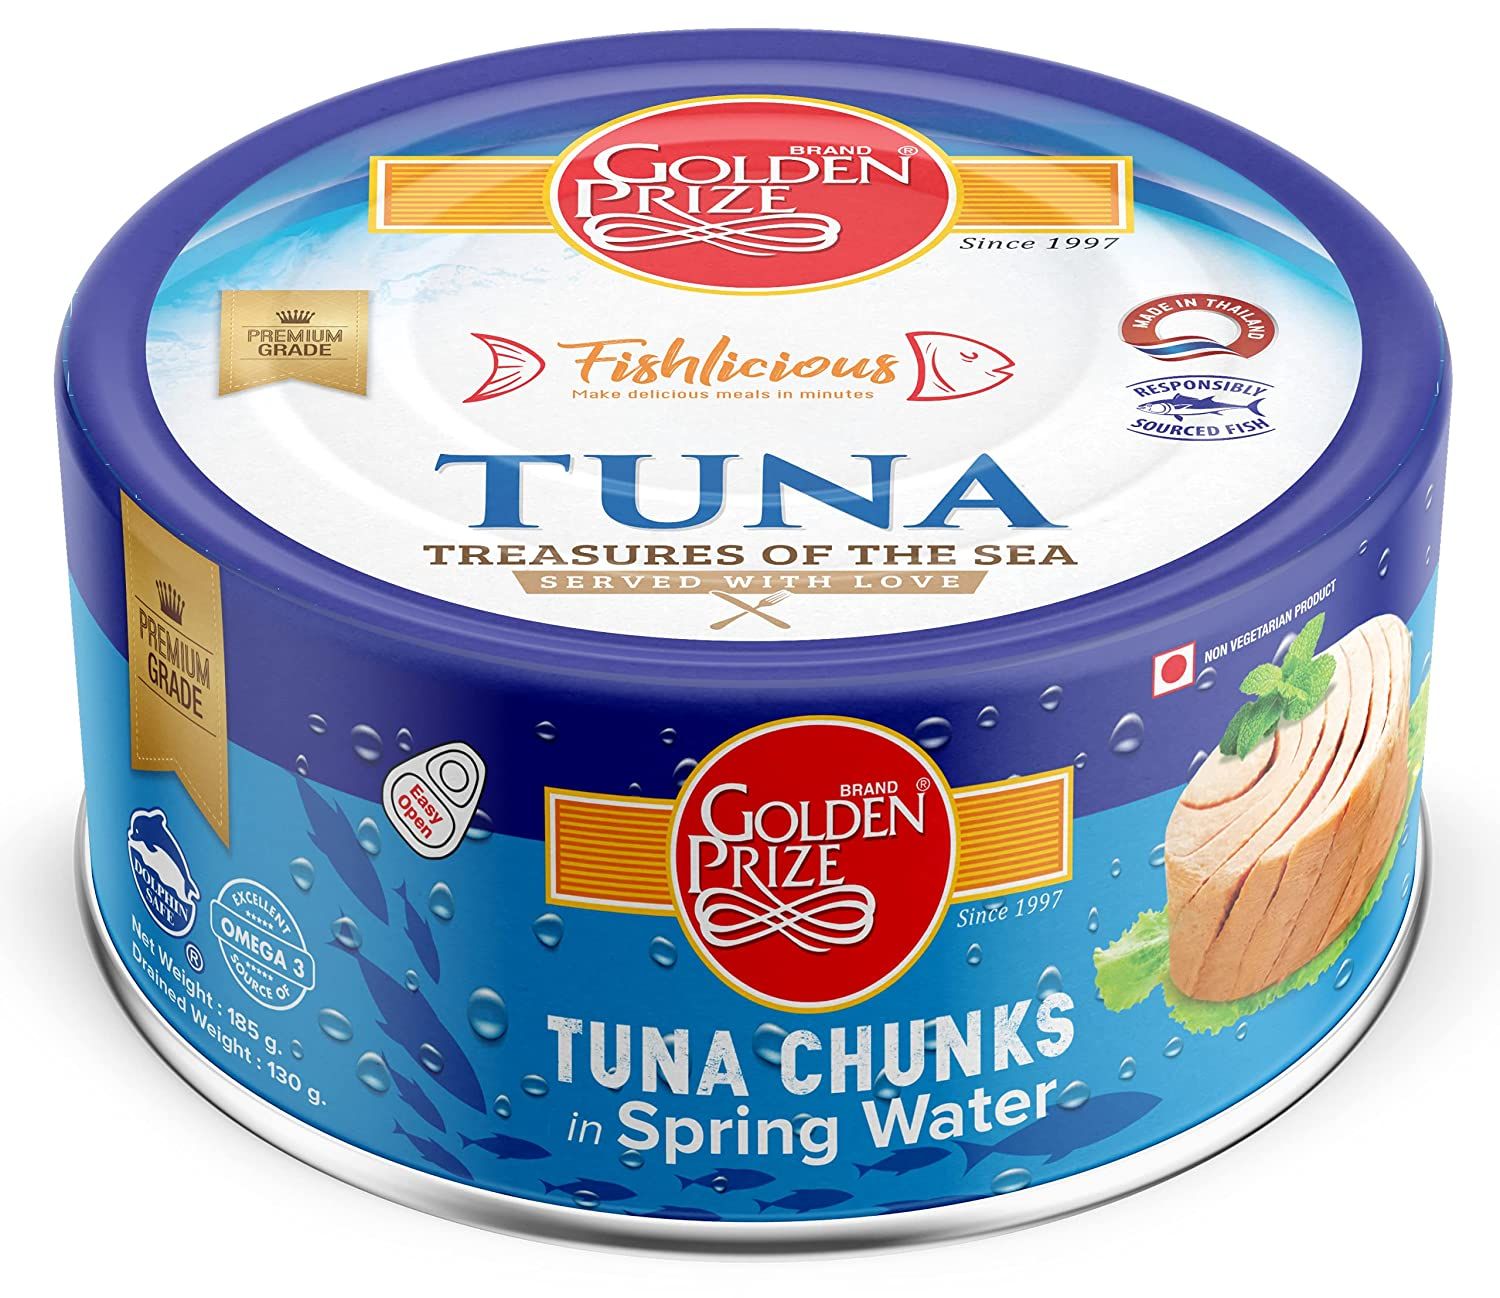 Golden Prize Canned Tuna Chunks in Spring Water Image